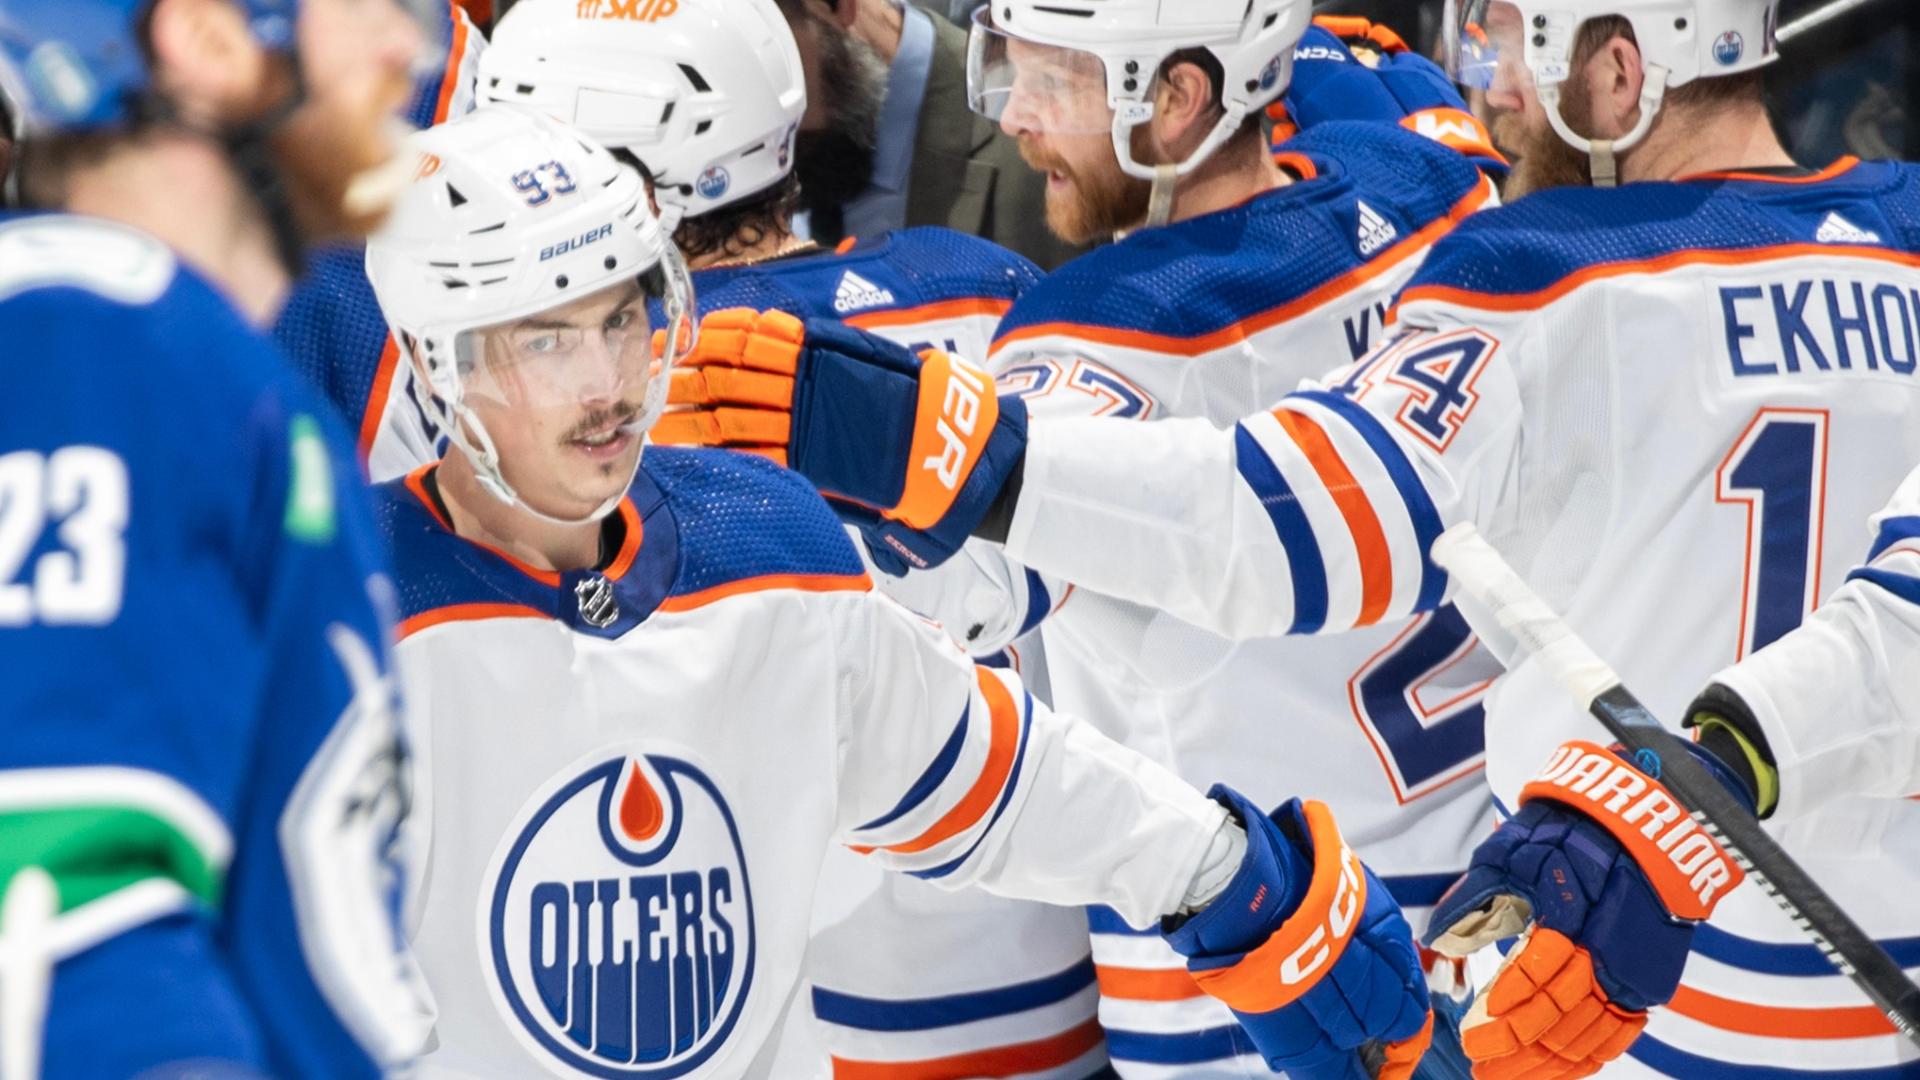 Ryan Nugent-Hopkins scores Oilers' third goal of the game